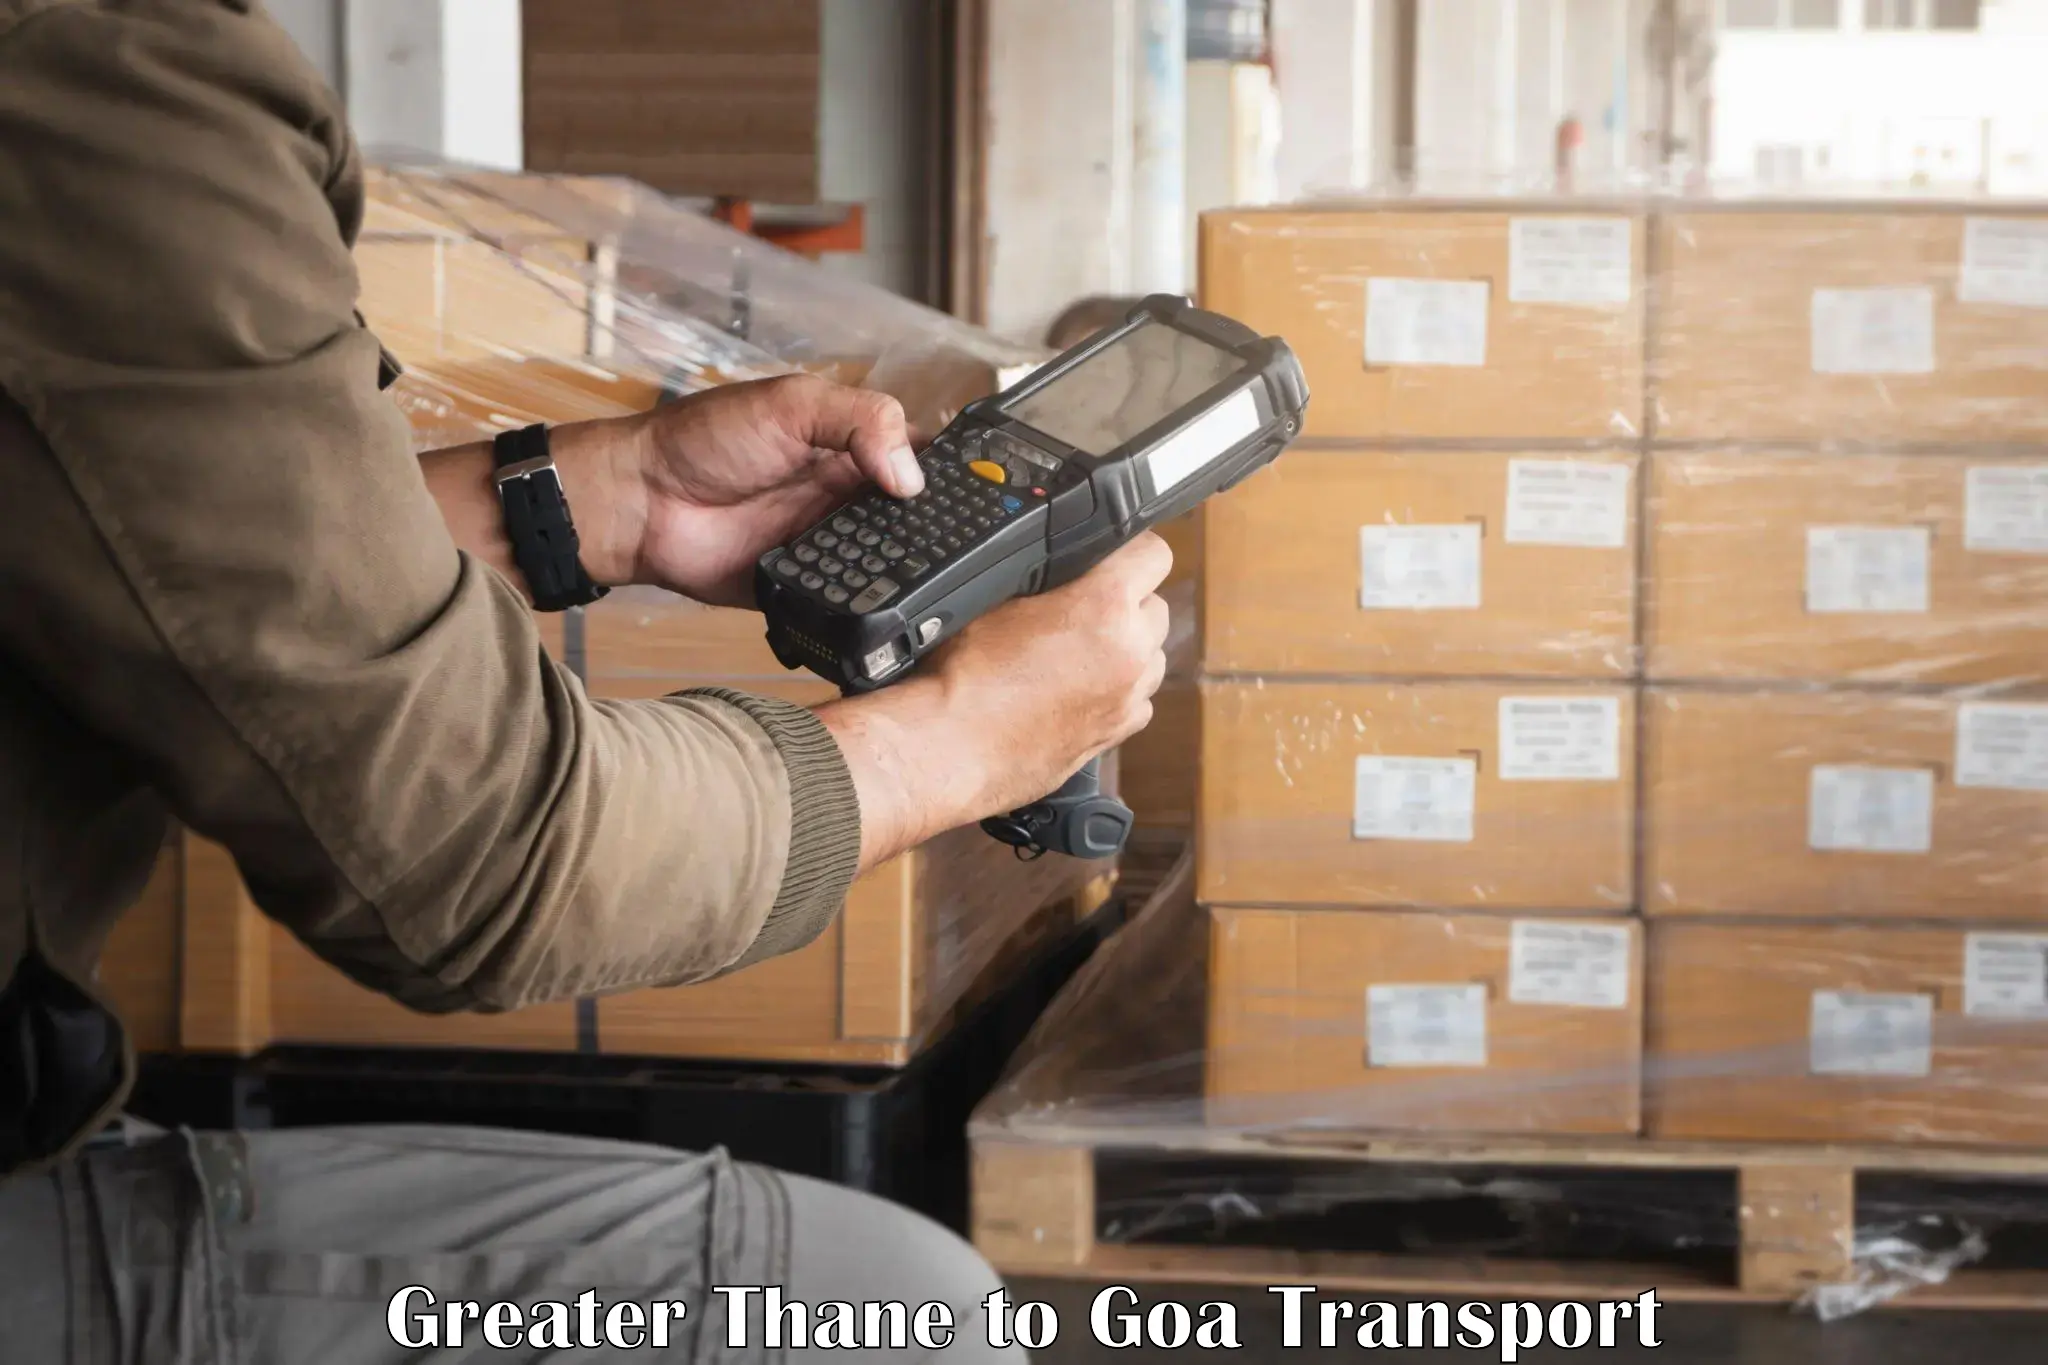 Online transport service Greater Thane to Margao